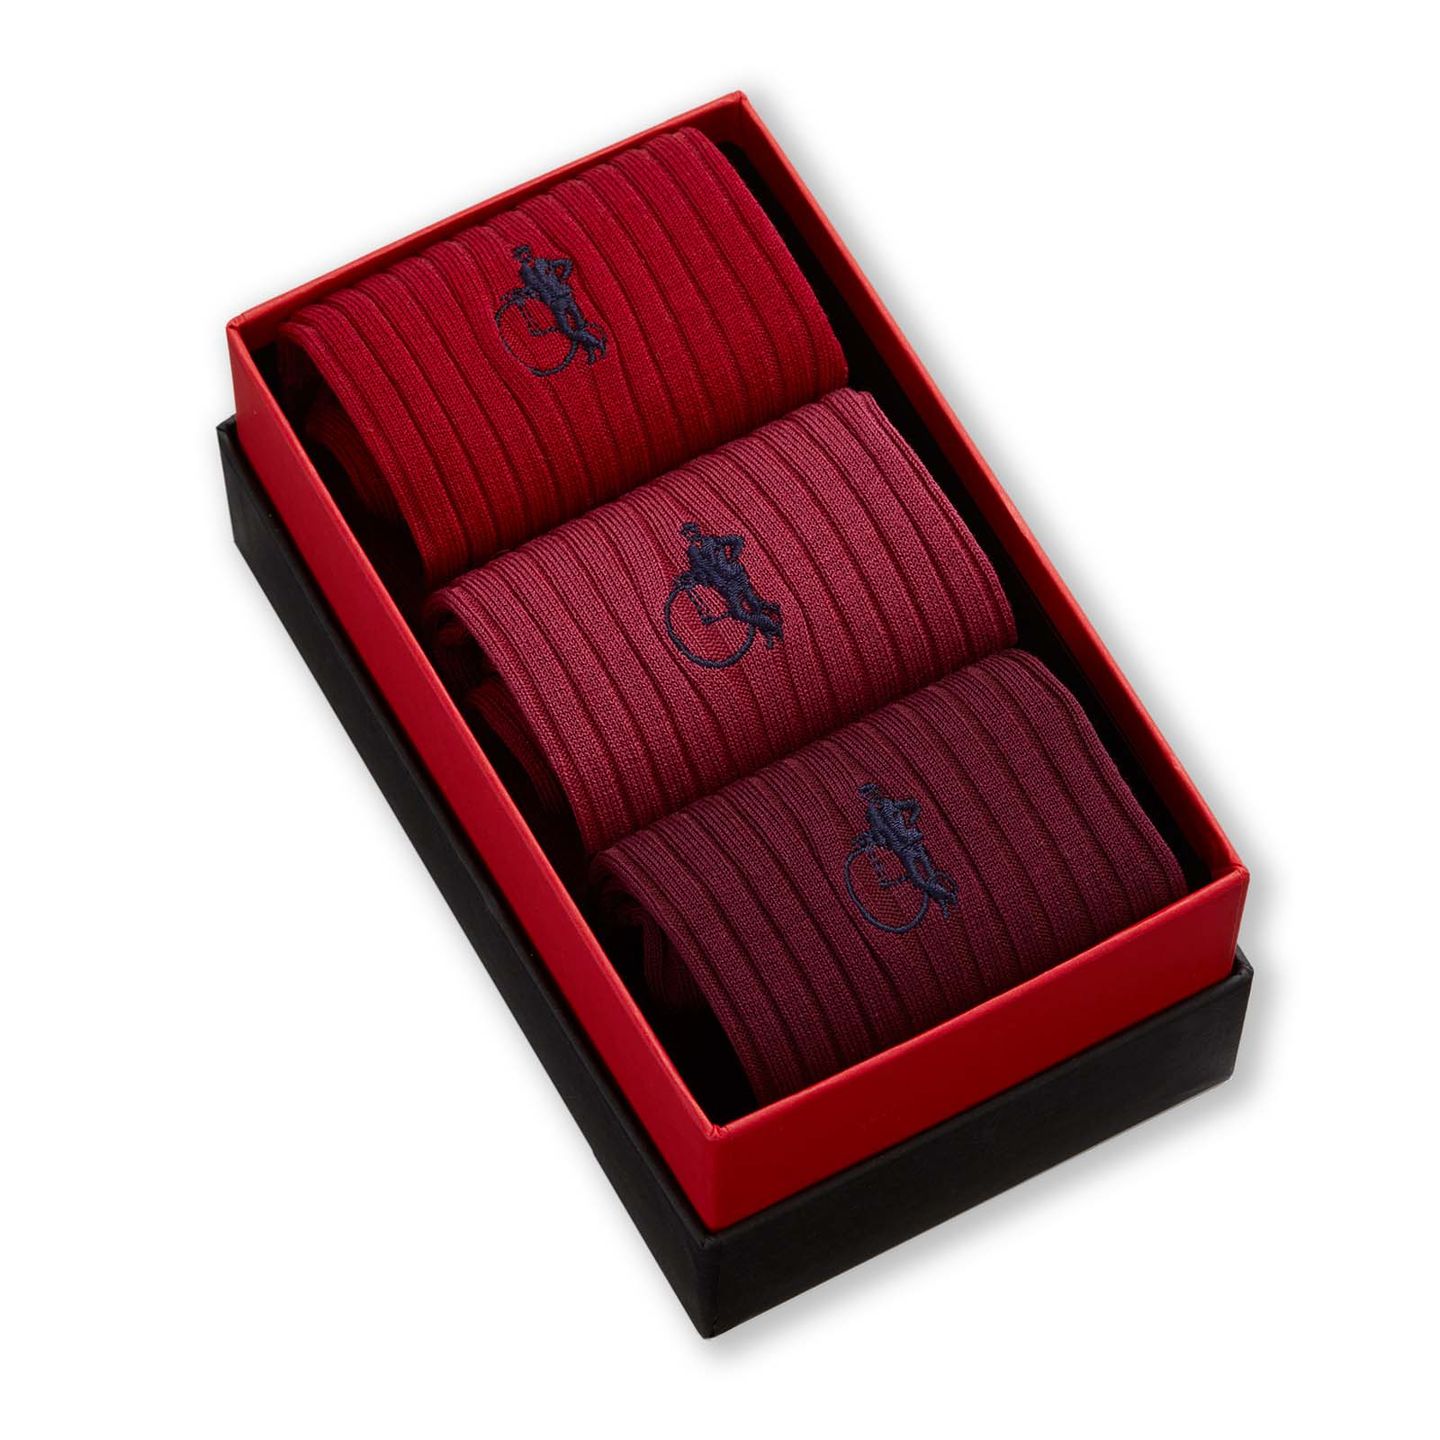 Trio of different red hue socks in a presentation box